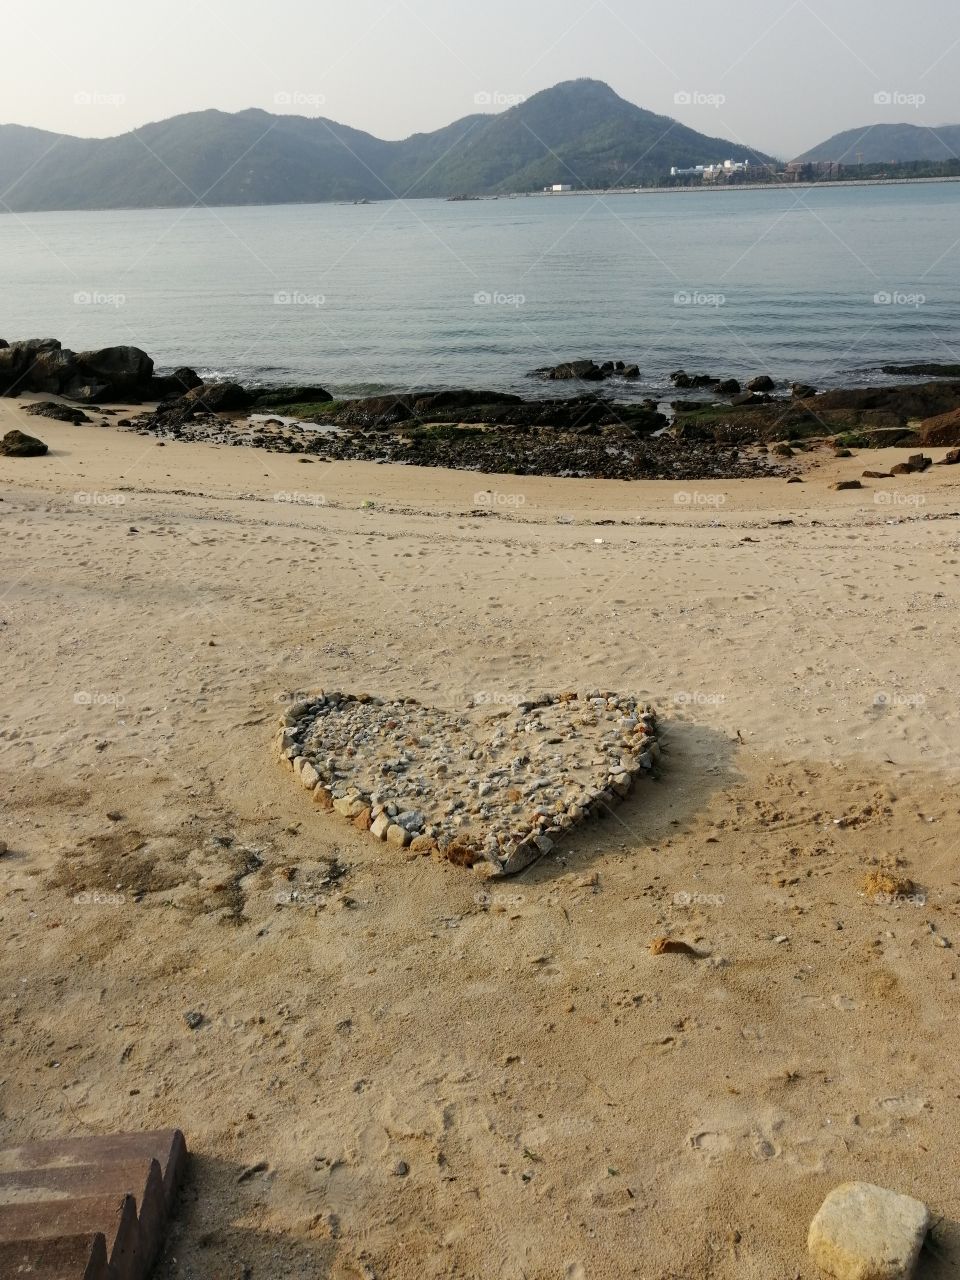 Heart of stones upon the beach in beauty bathed with warmth and love. Each a treasure gathered by careful hands.